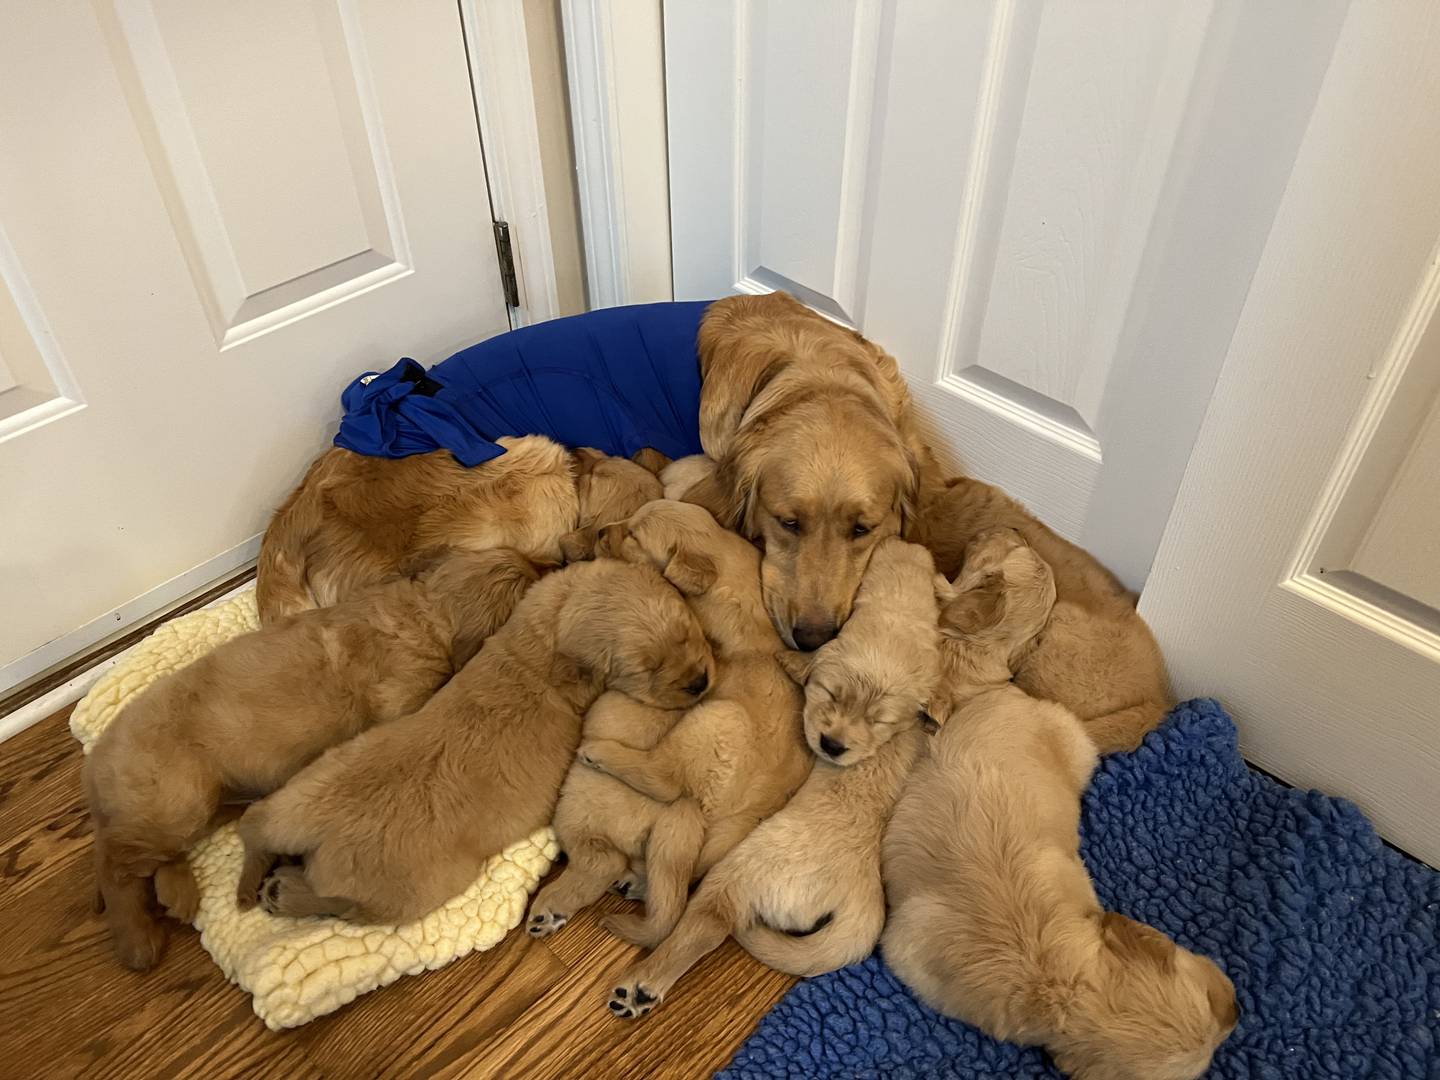 Kristen Vesely of Crystal Lake fostered 13 puppies, born Dec. 13, 2022, to Hope. The dog was rescued just days earlier from an Ohio puppy mill and is shown here with her five-week-old puppies.